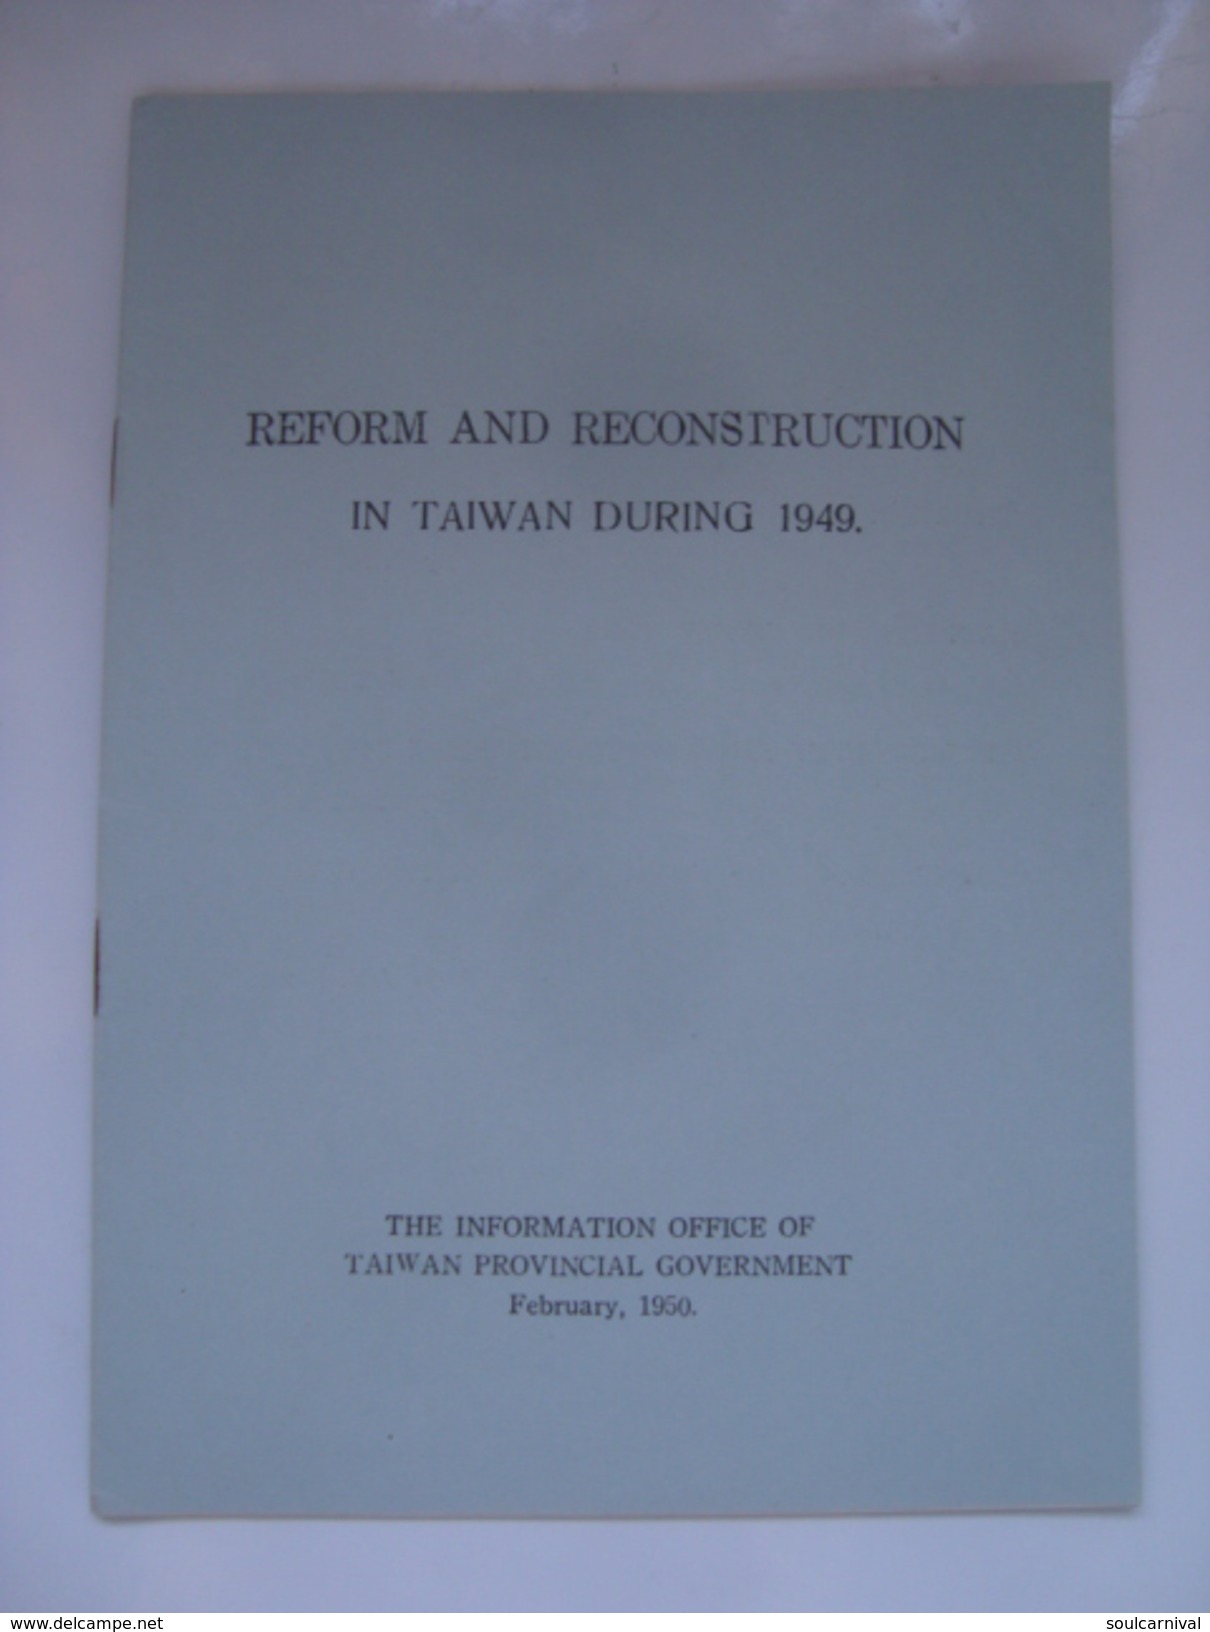 REFORM AND RECONSTRUCTION IN TAIWAN DURING 1949 - INFORMATION OFFICE OF TAIWAN PROVINCIAL GOVERNMENT. T. N. TSAI. - Asie